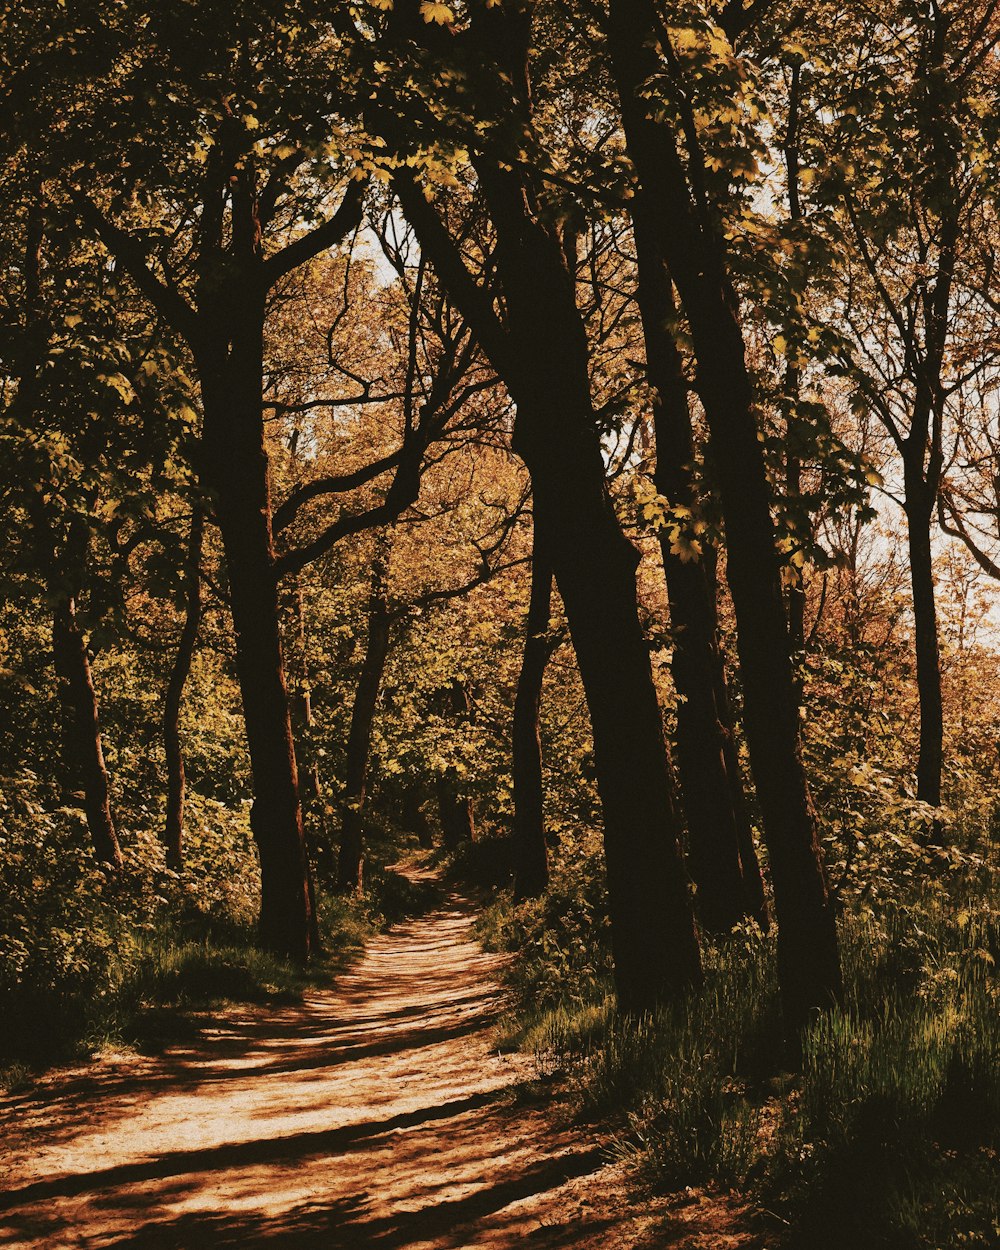 a dirt road surrounded by trees in a forest